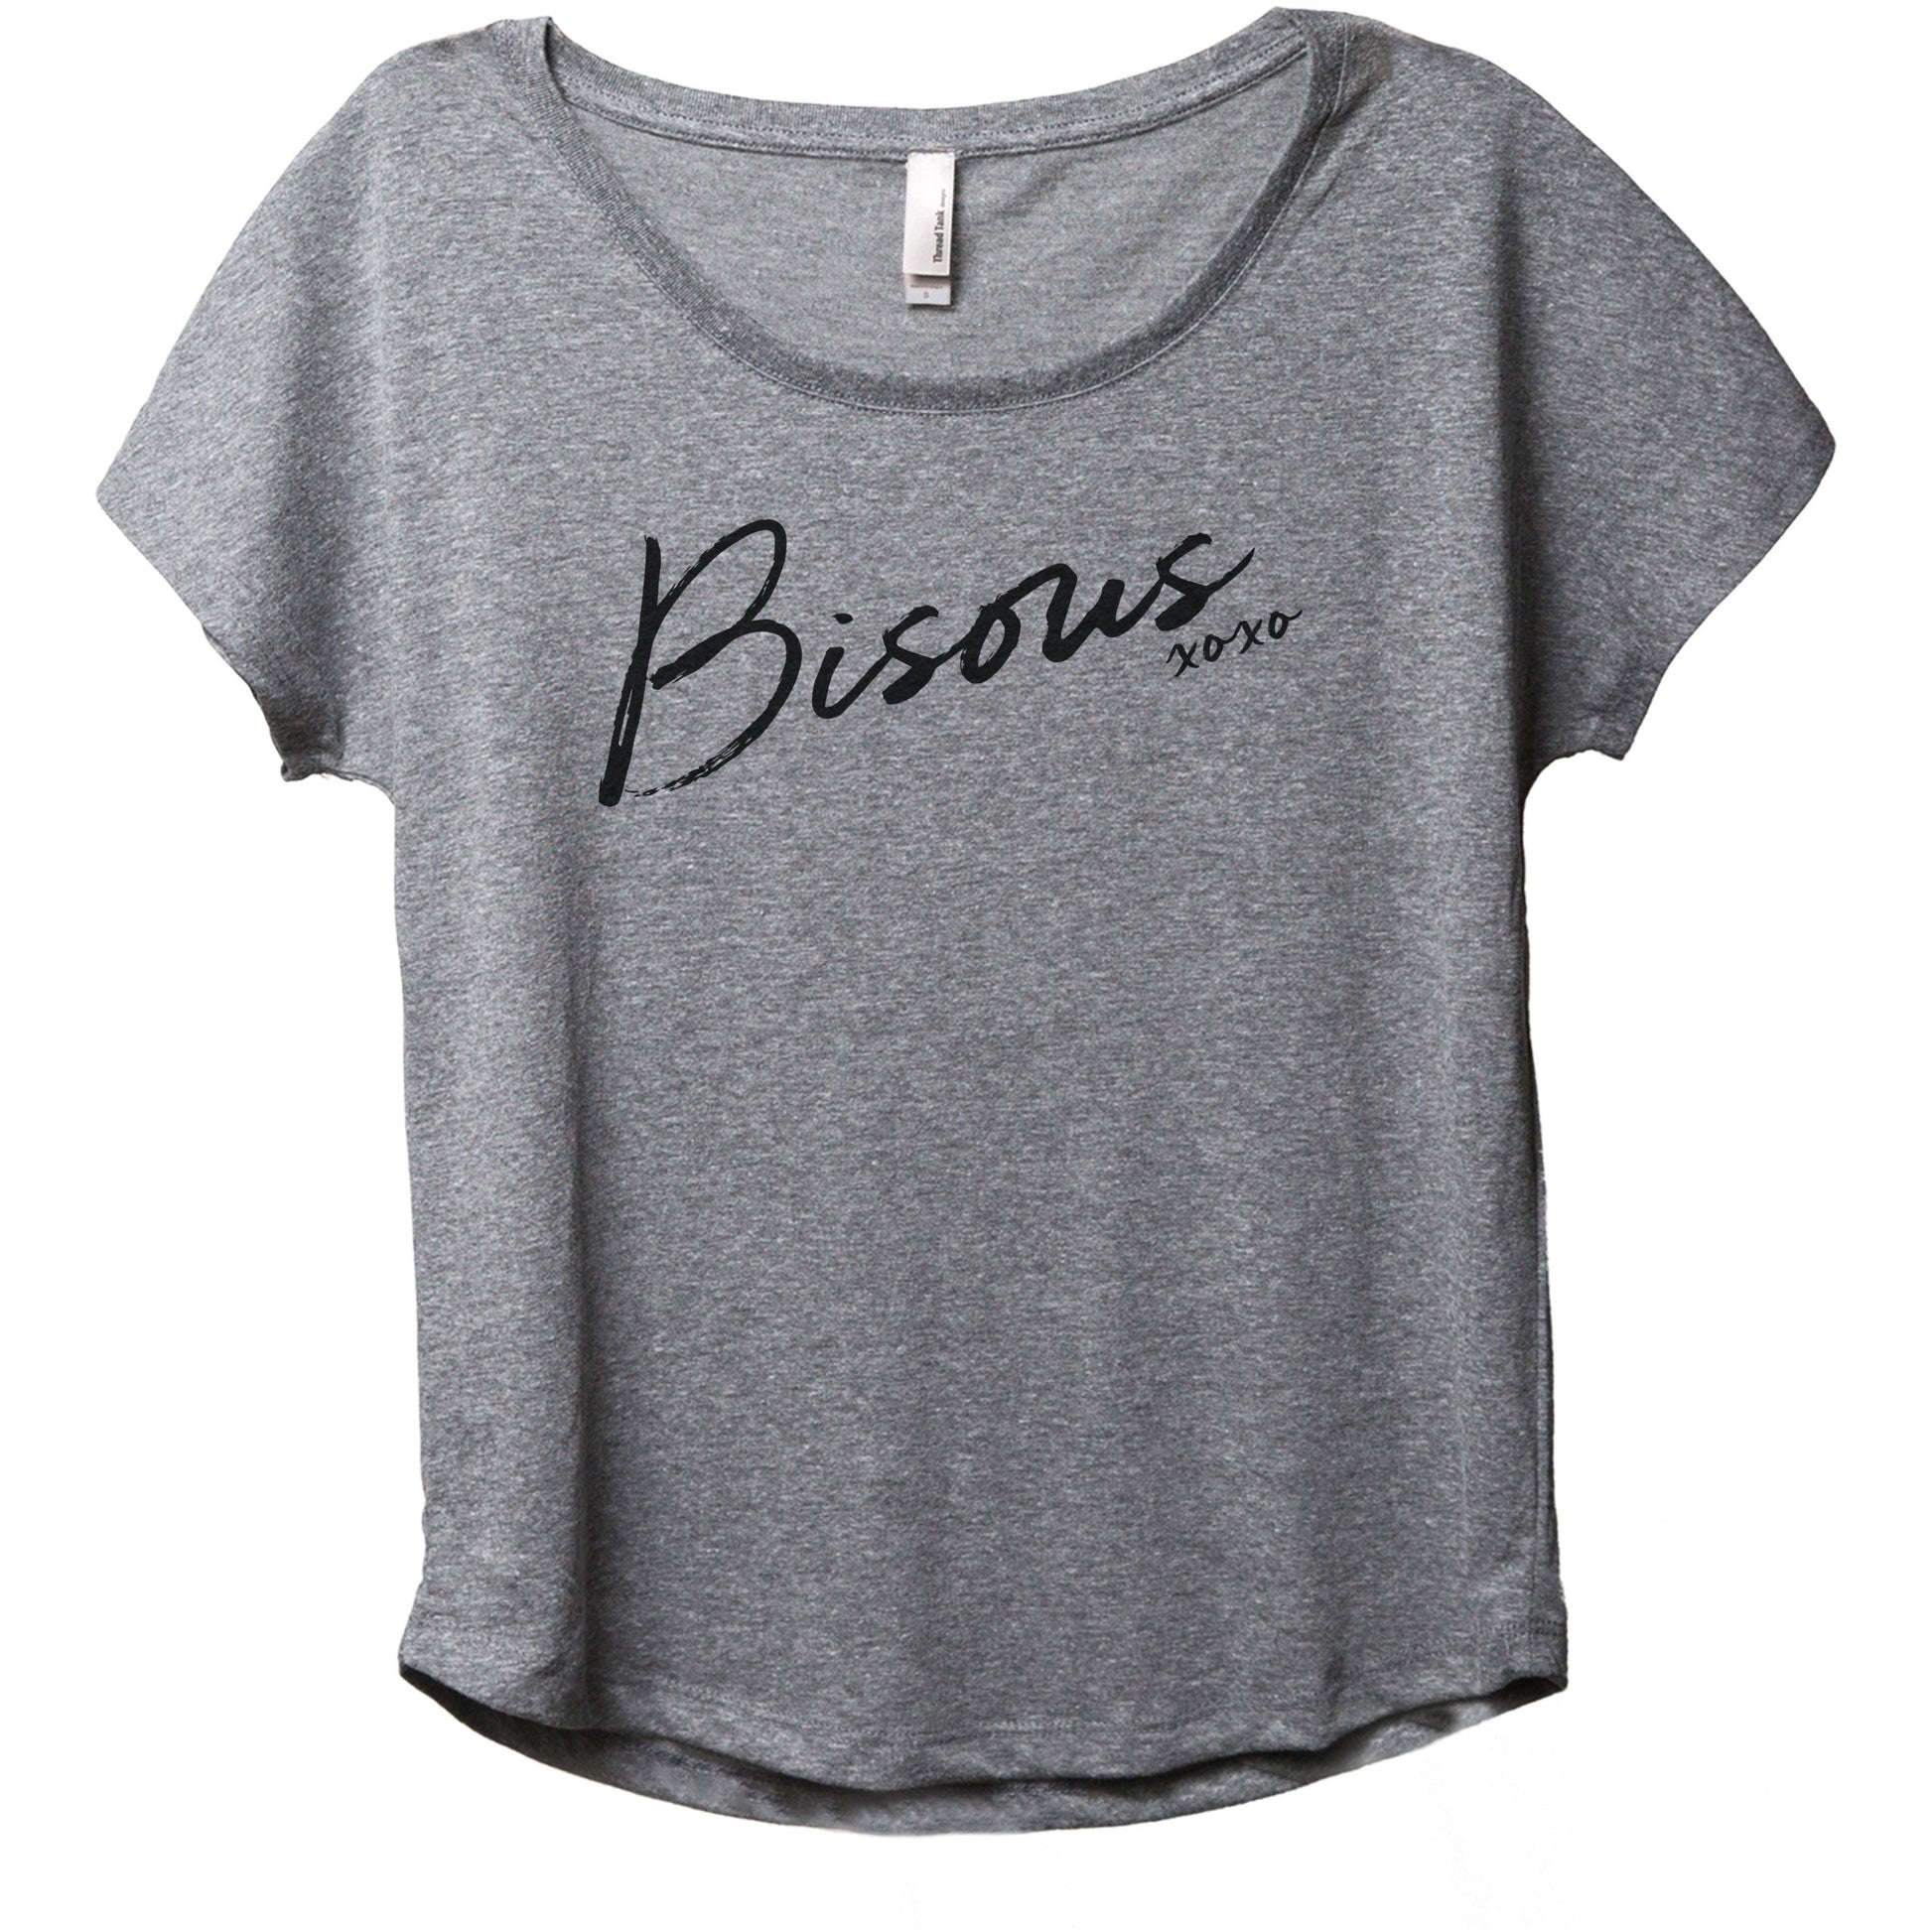 Bisous XOXO Women's Relaxed Slouchy Dolman T-Shirt Tee Heather Grey